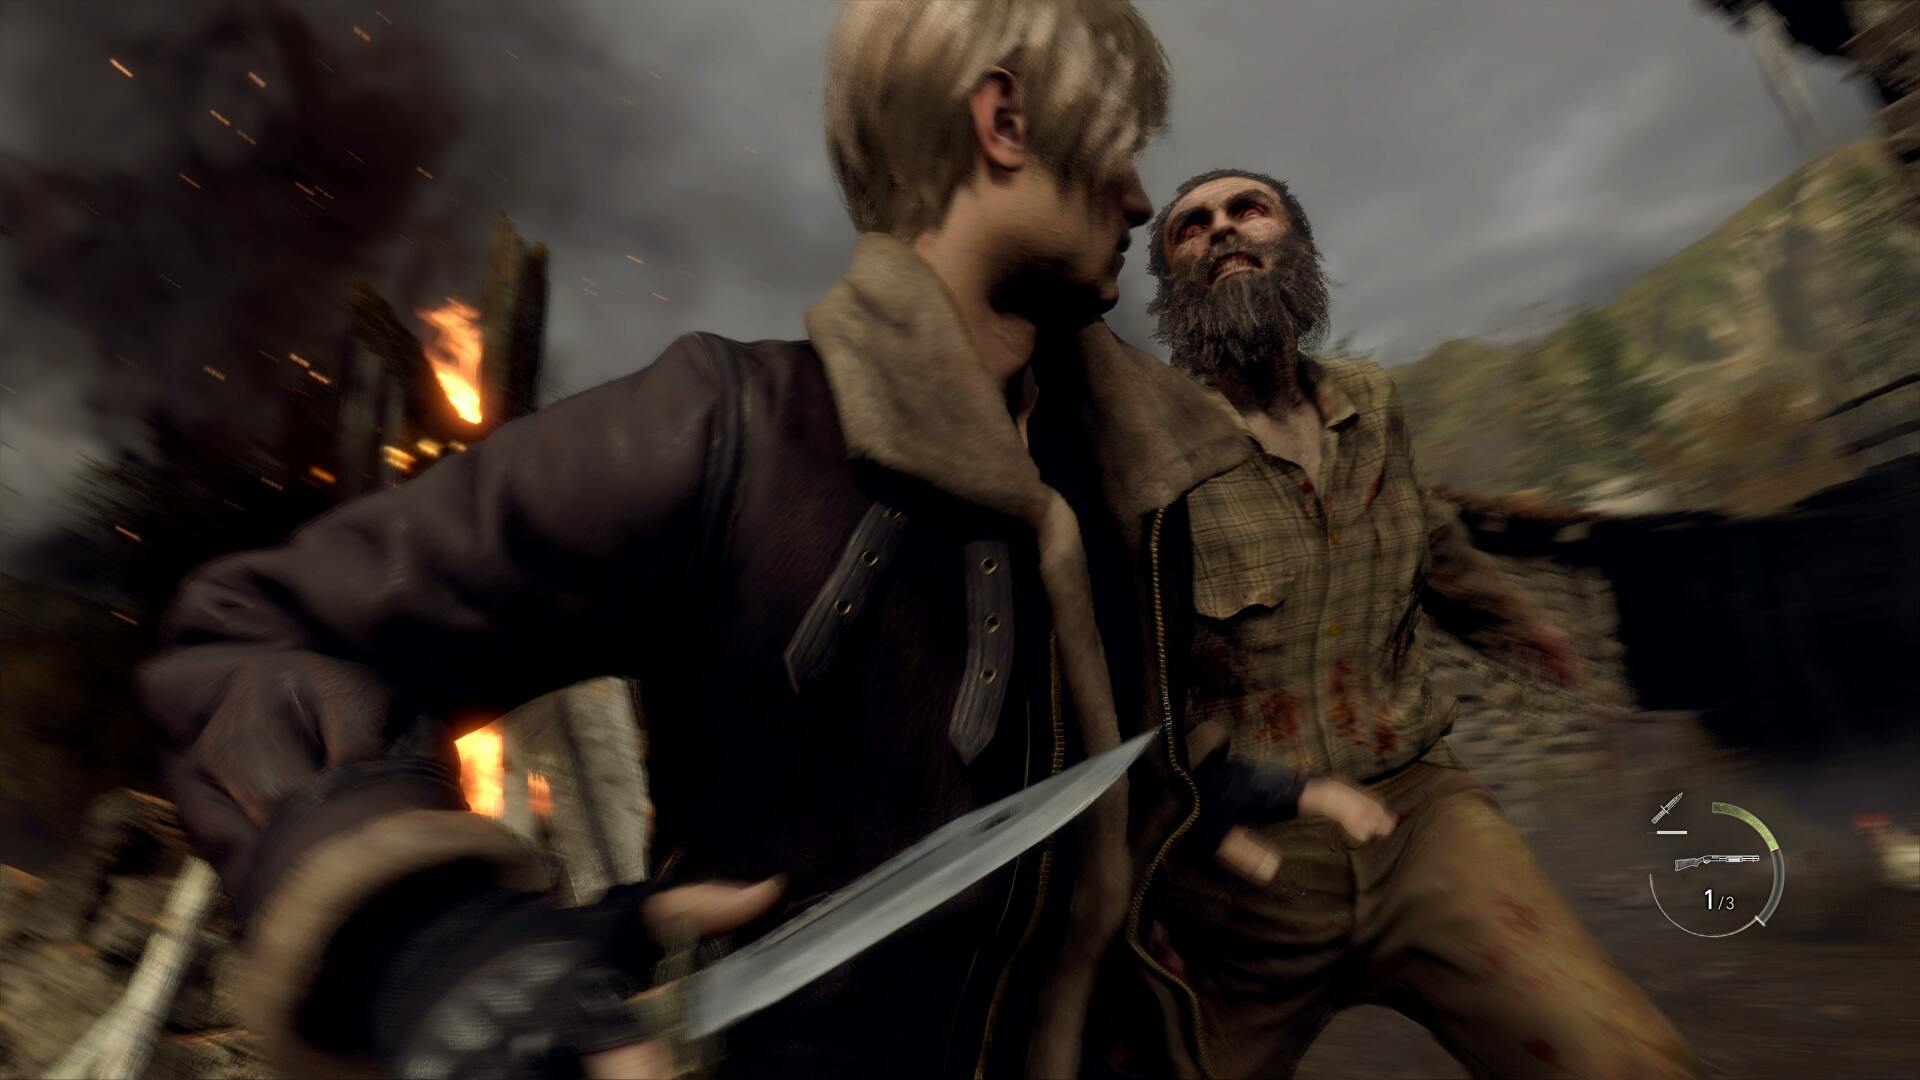 Resident Evil 4 Remake lets you move and shoot, but remains staunchly authentic